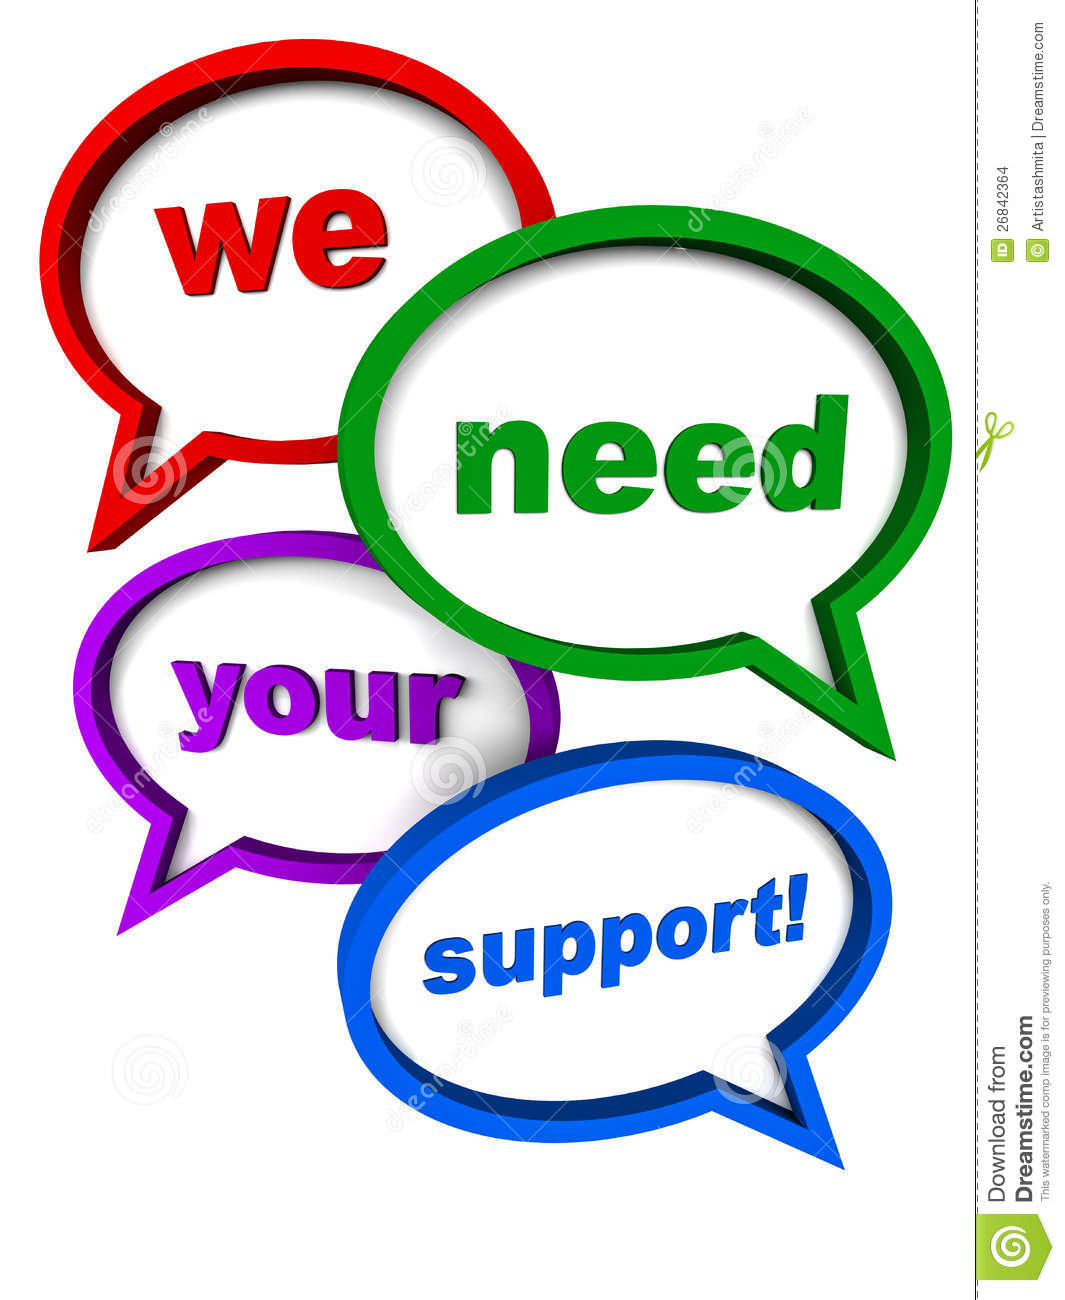 Seeking Support From Clients Users Or The Public For A Cause Of